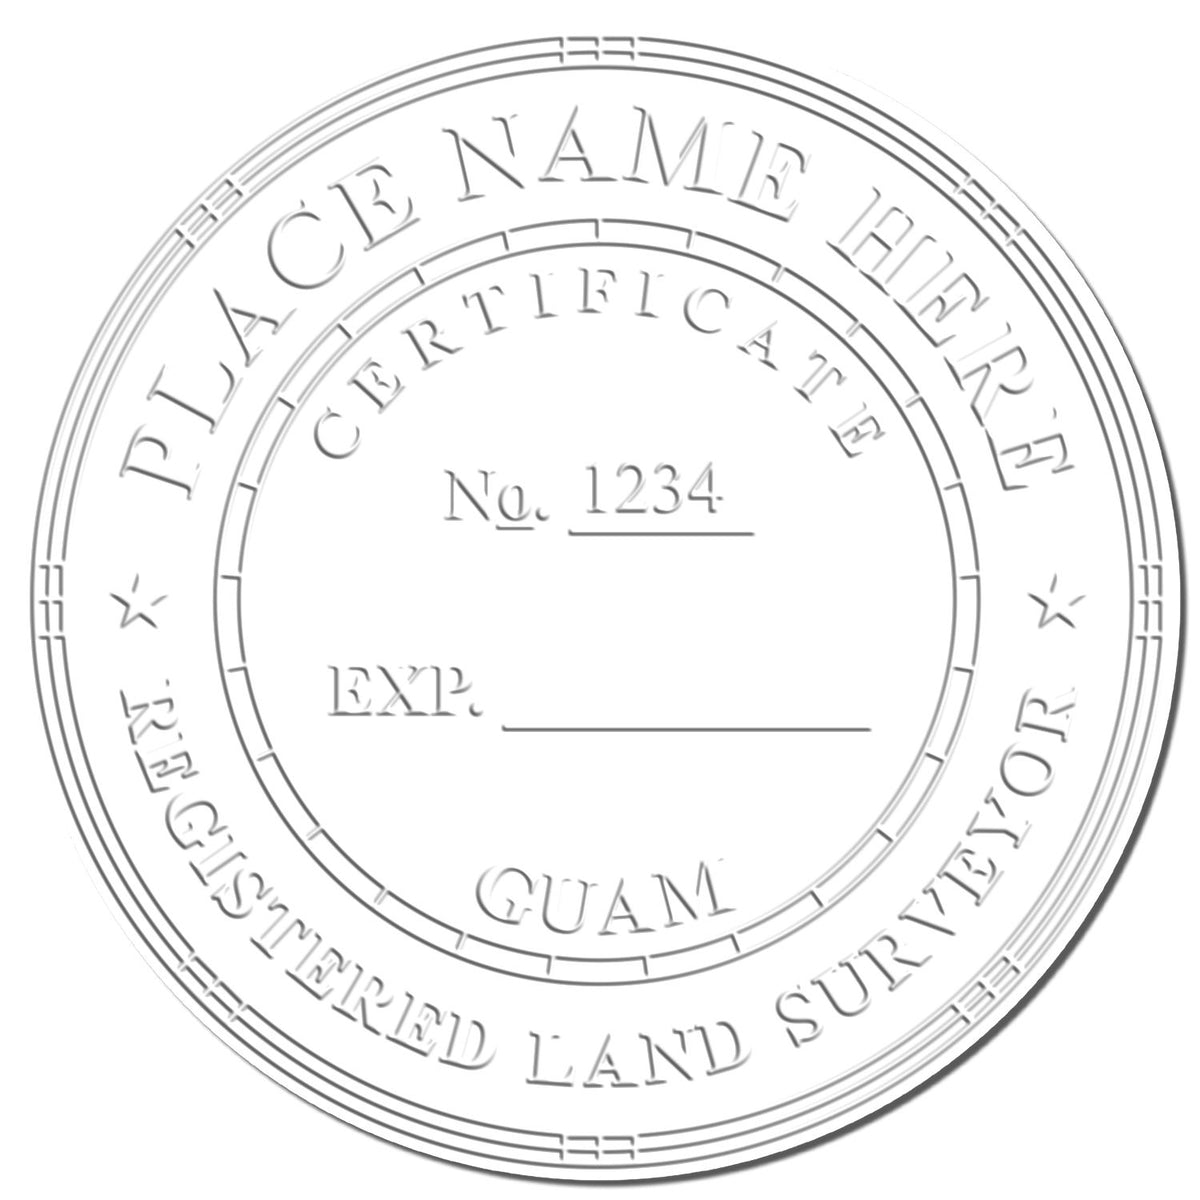 This paper is stamped with a sample imprint of the Gift Guam Land Surveyor Seal, signifying its quality and reliability.